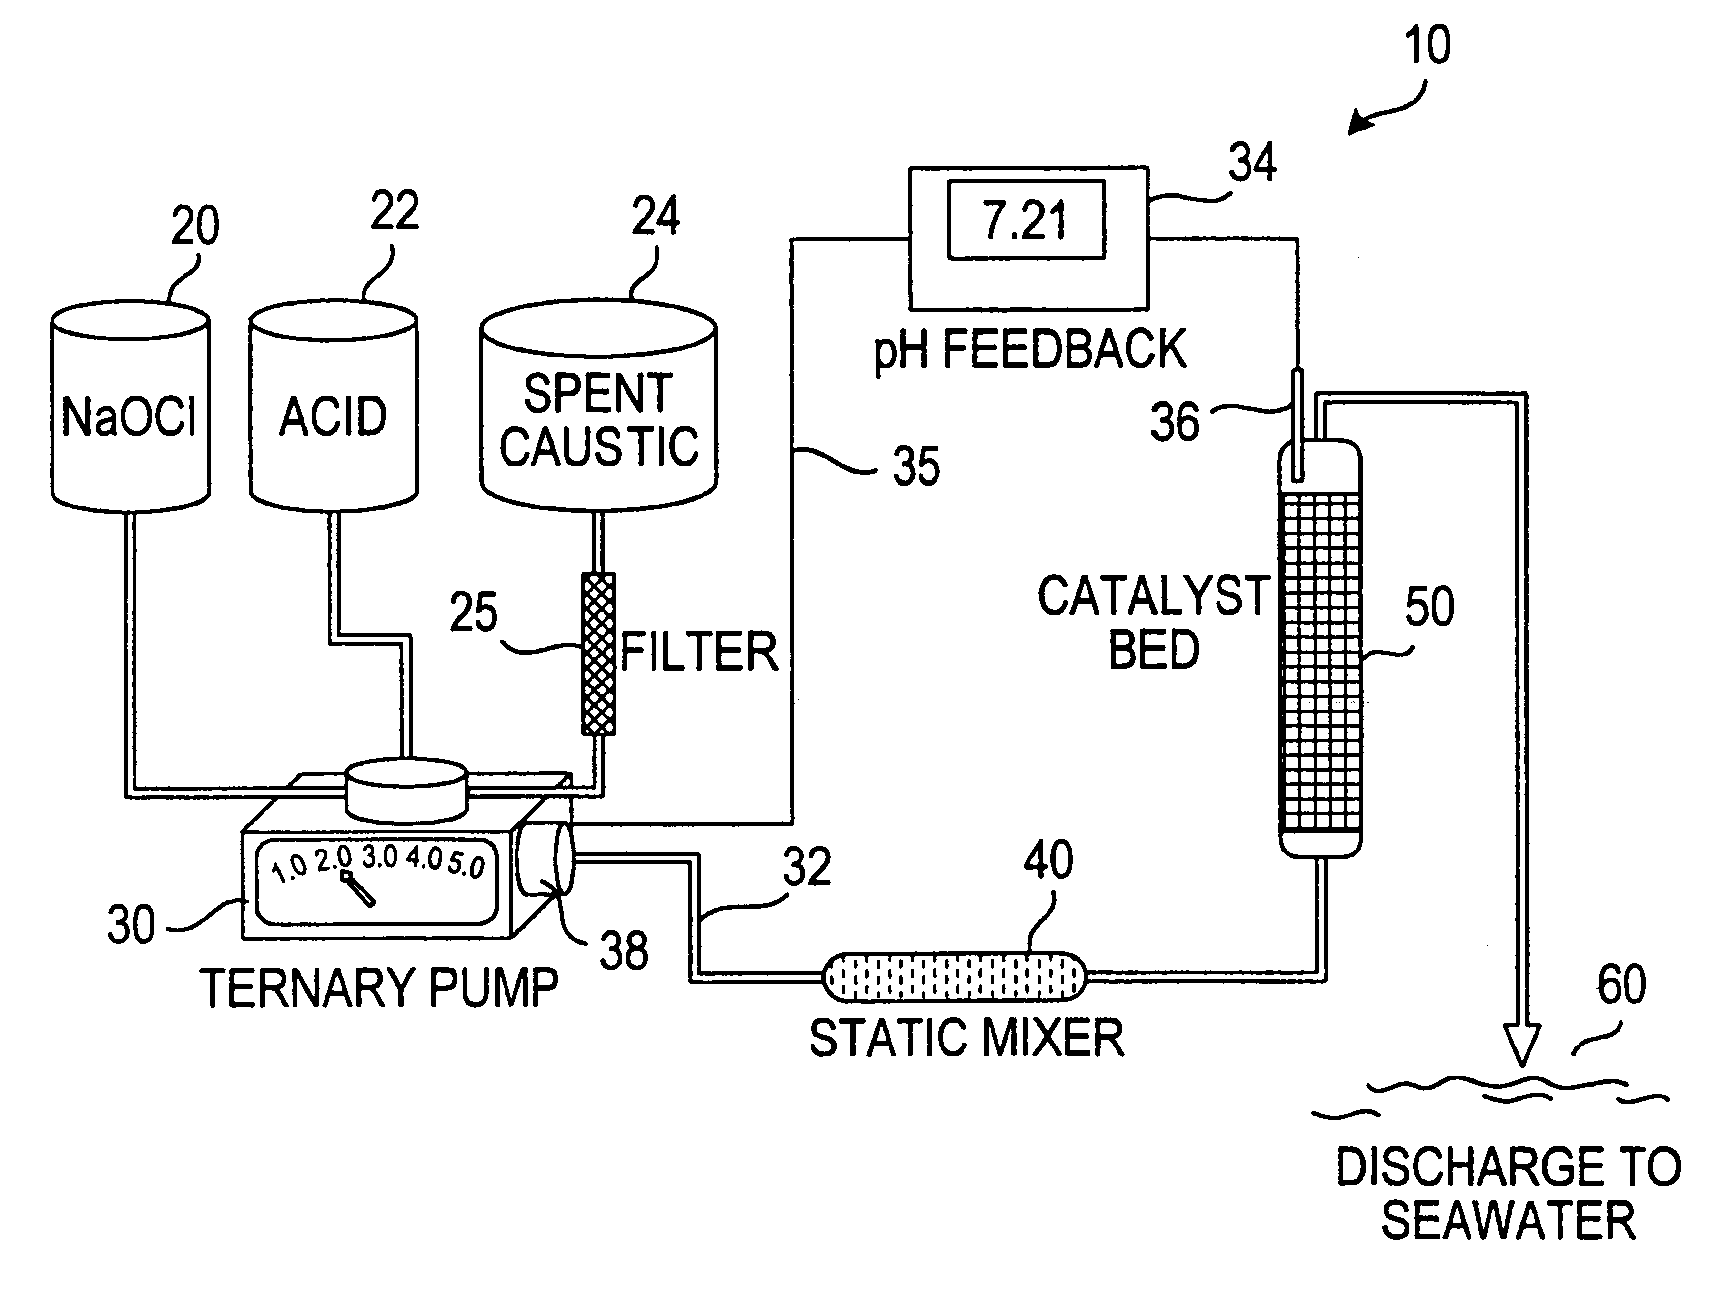 Process for treating a sulfur-containing spent caustic refinery stream using a membrane electrolyzer powered by a fuel cell